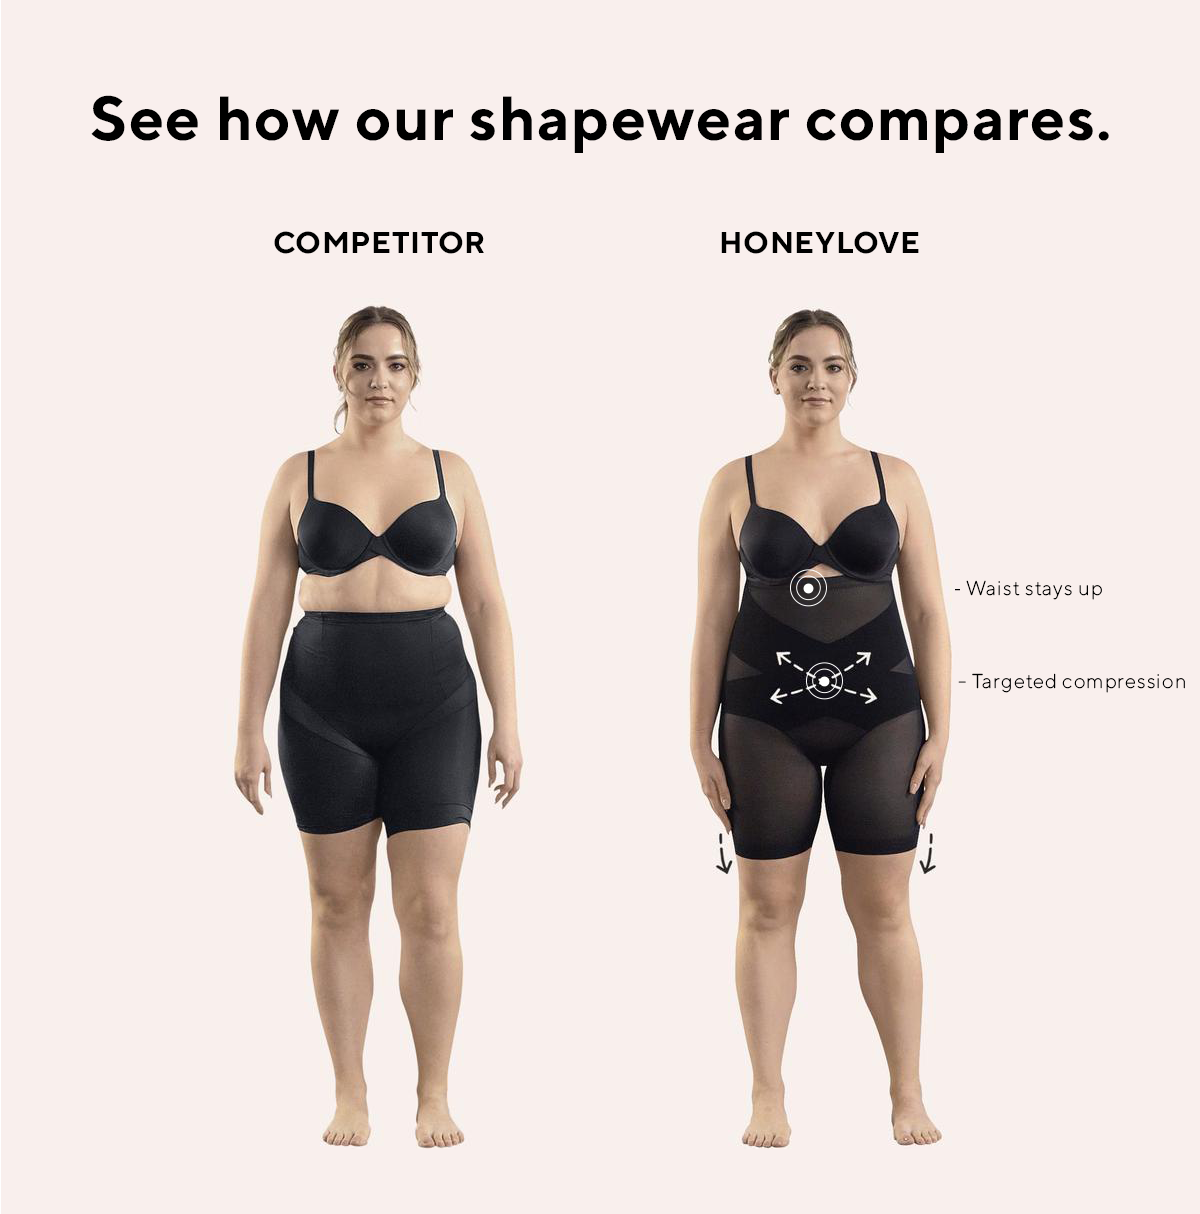 SPANX BEFORE AND AFTER  HOW TO CHOOSE THE RIGHT TYPE OF SHAPEWEAR 